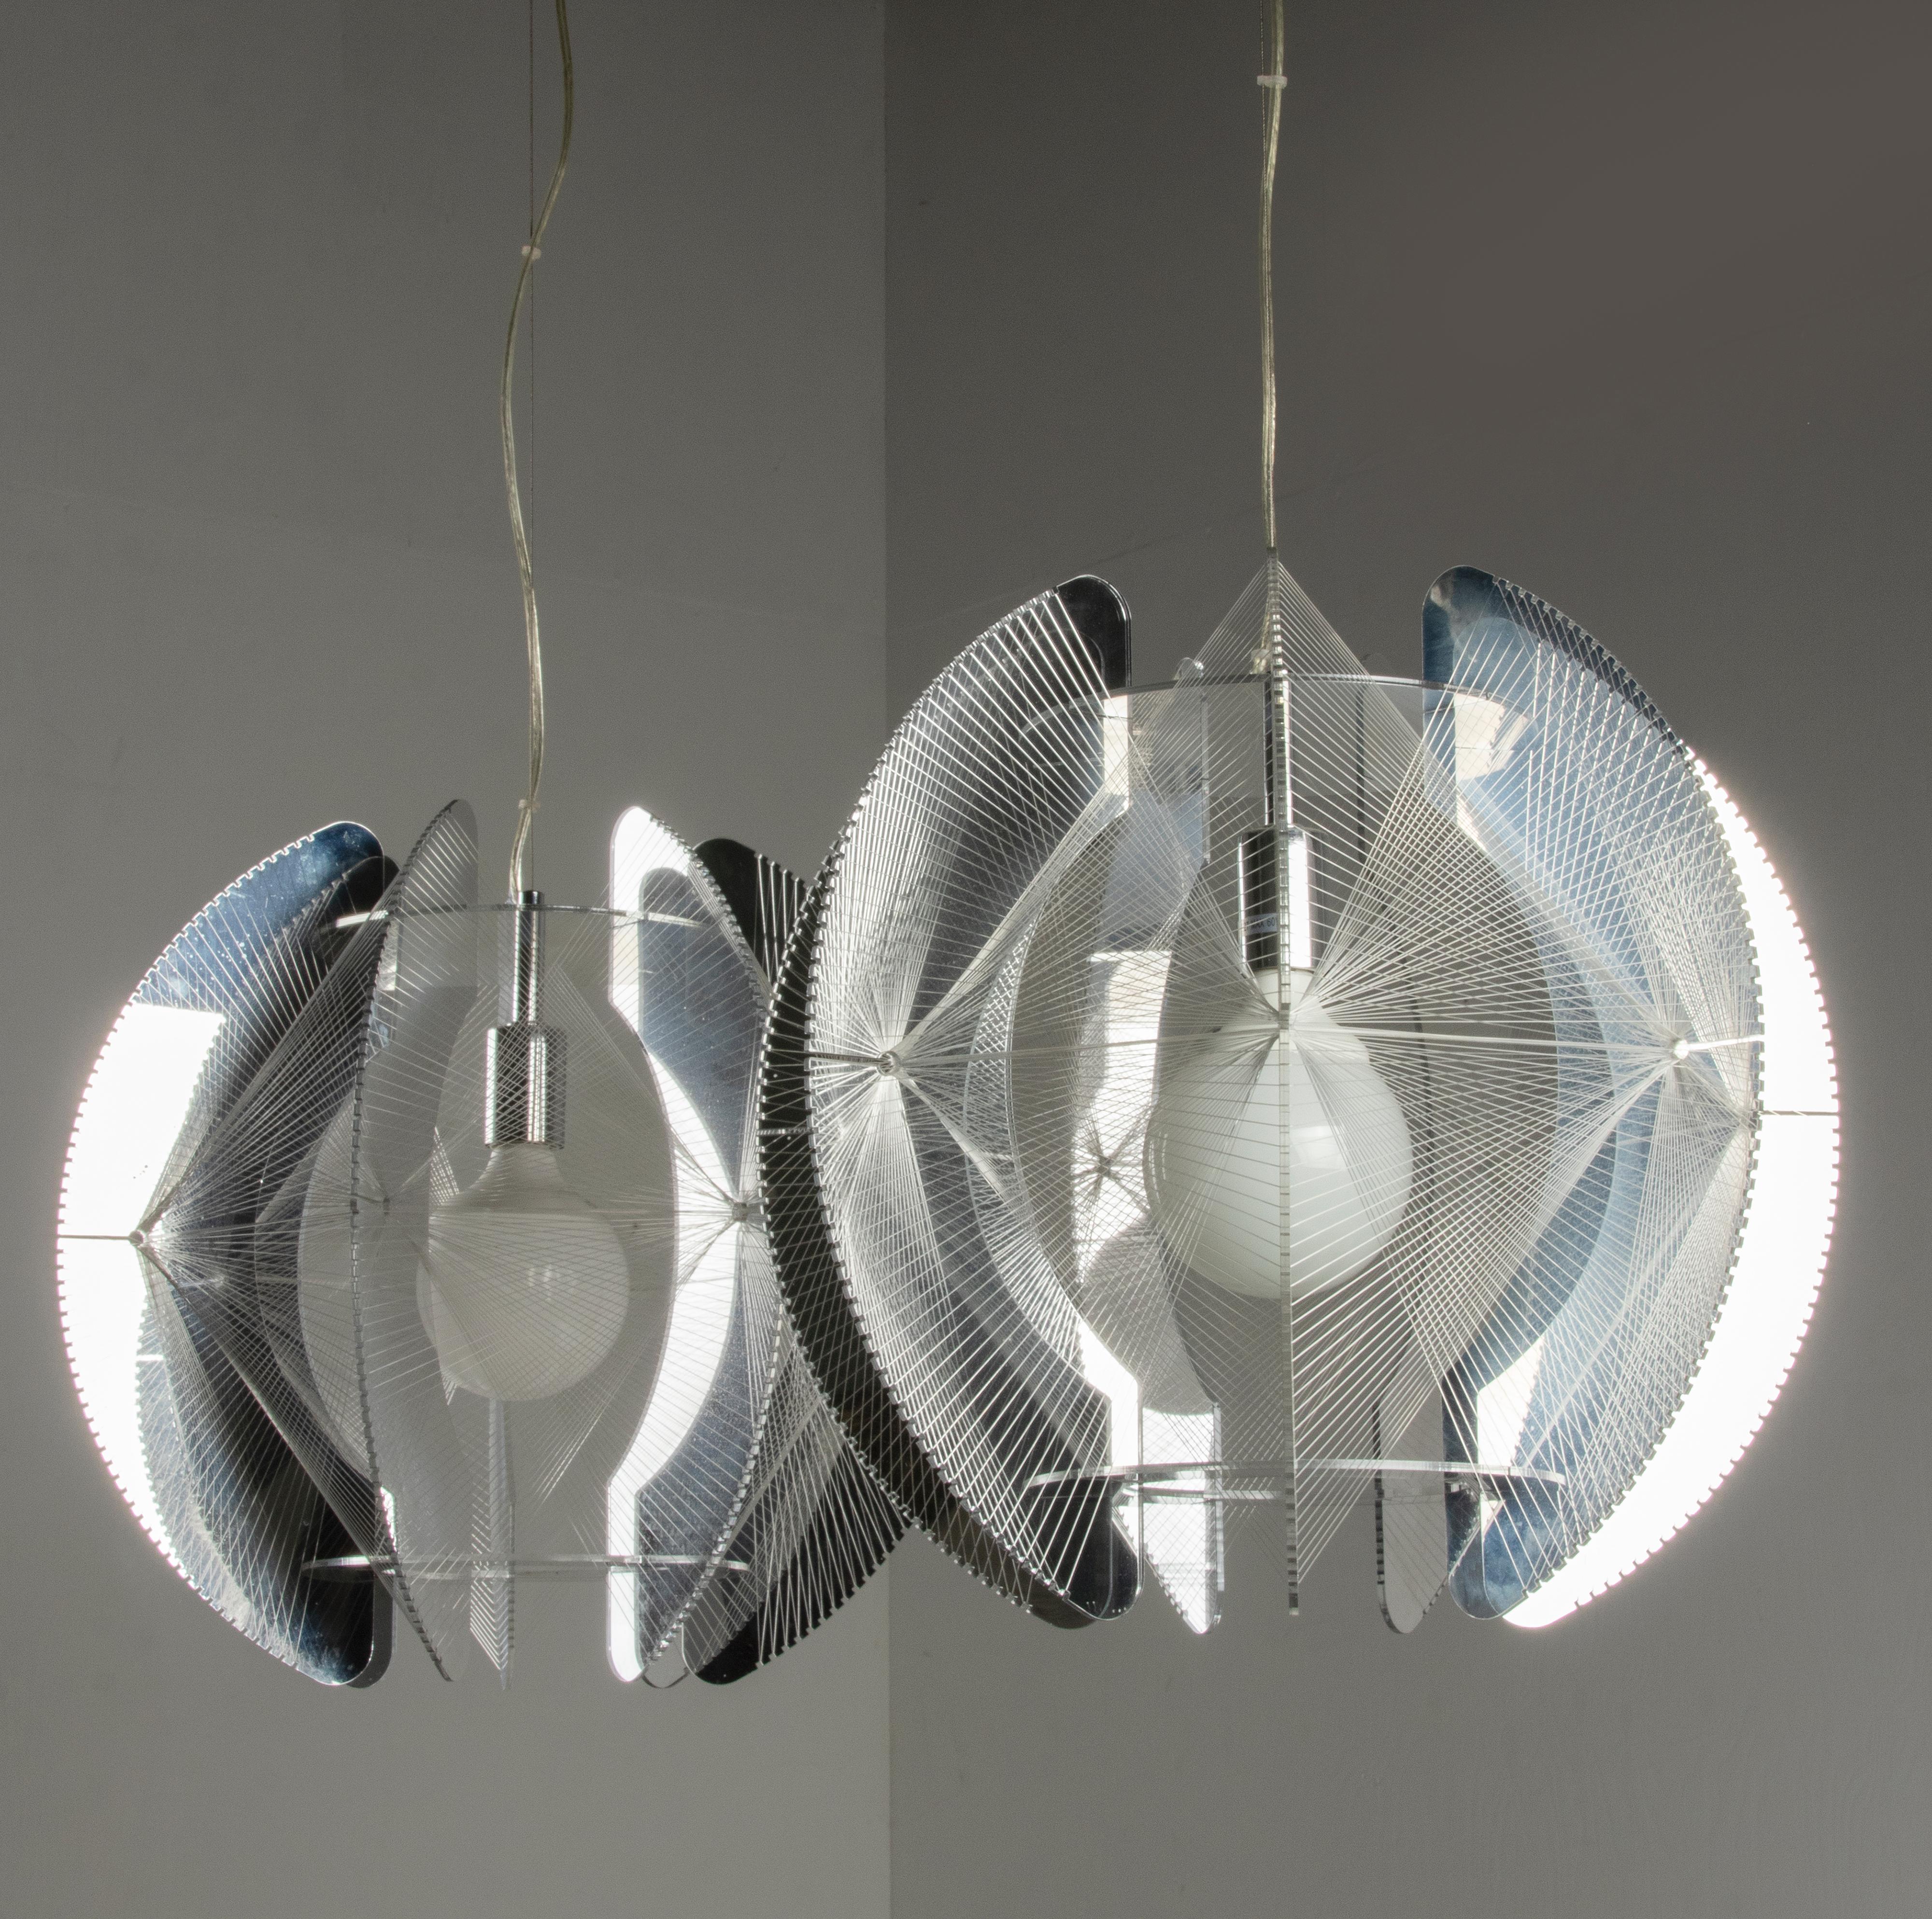 A pair of Mid-Century Modern pendant lamps, design by Paul Secon and produced by Sompex. Made of chrome acrylic slats wound with nylon thread. It gives a warm light when lit. When smithed on, the chromed look slants gives nice ambient sphere. A